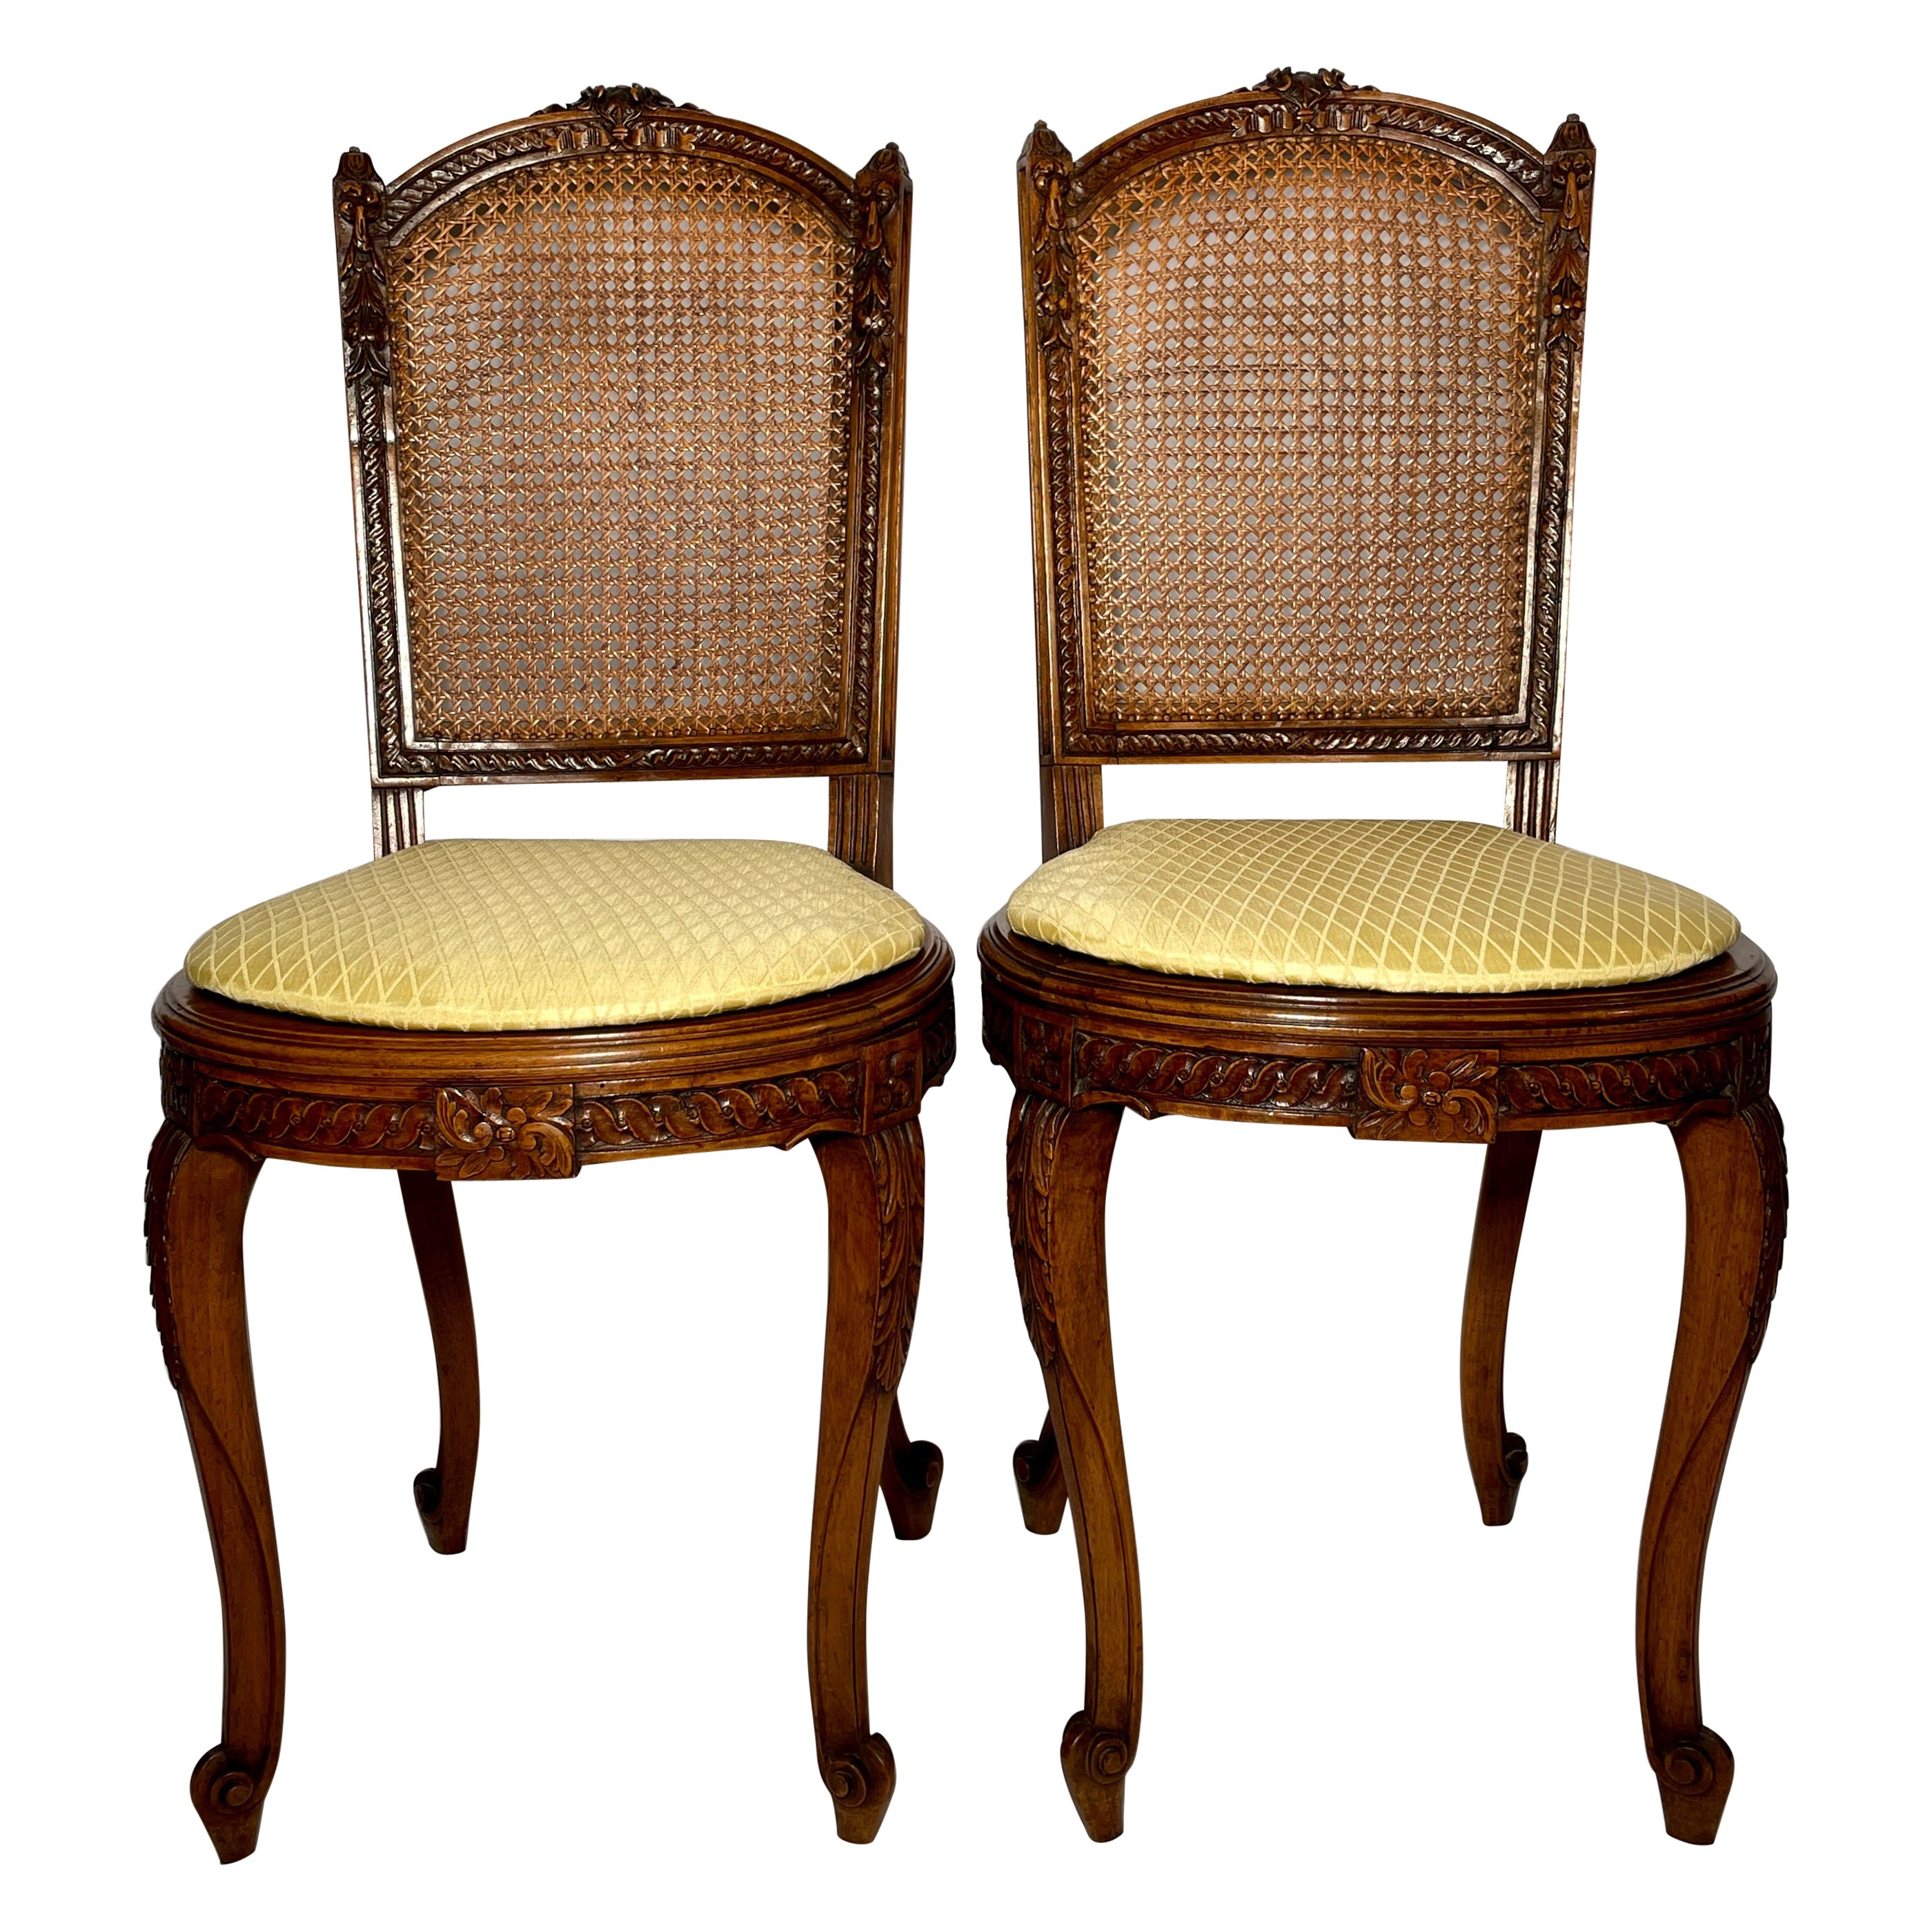 Pair Antique French Walnut Cane Back Side Chairs, circa 1880